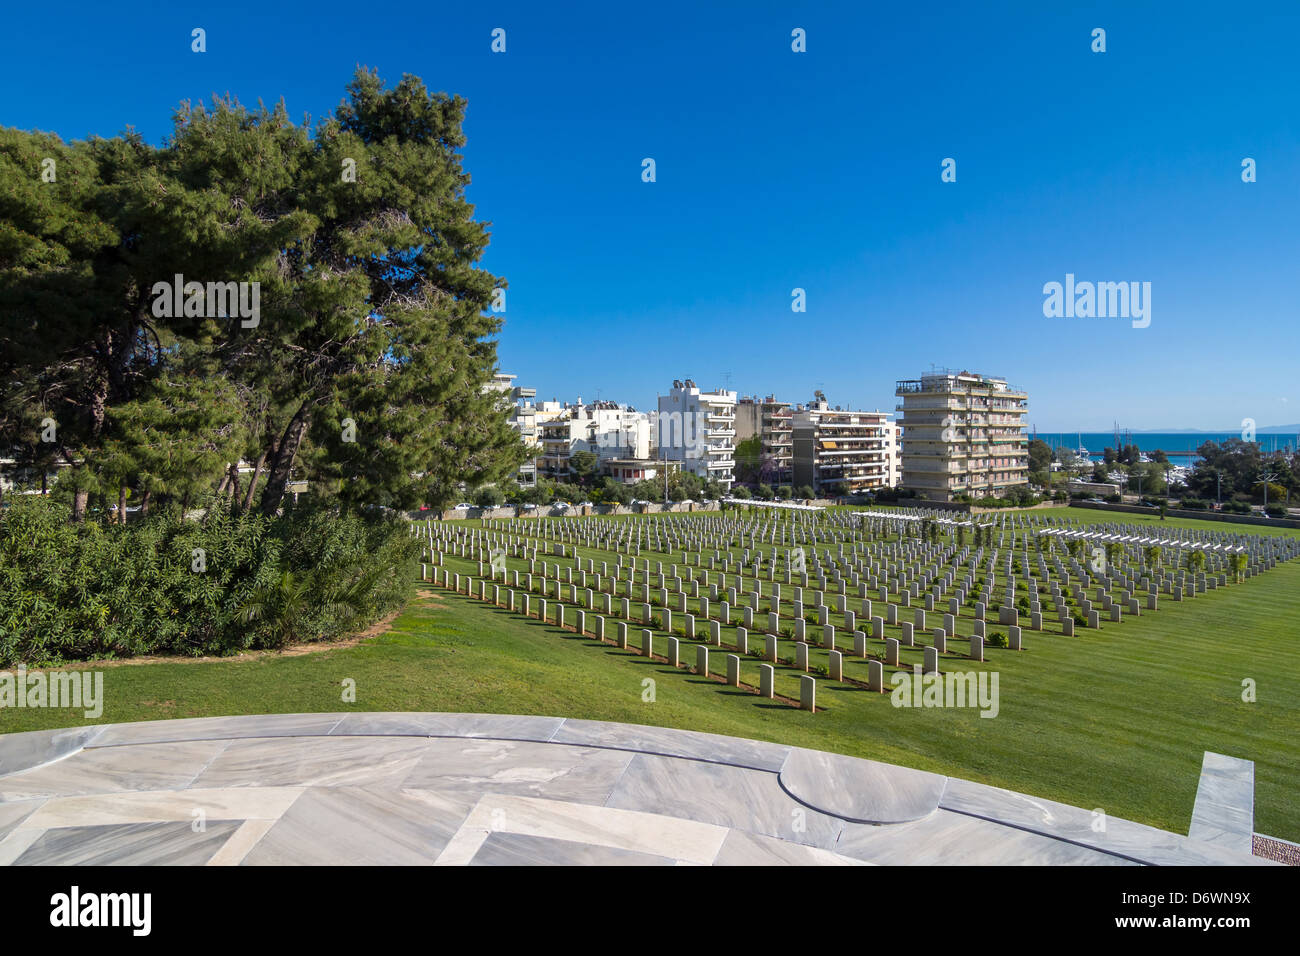 The world war 2 memorial cemetery in Greece against blue sky Stock Photo